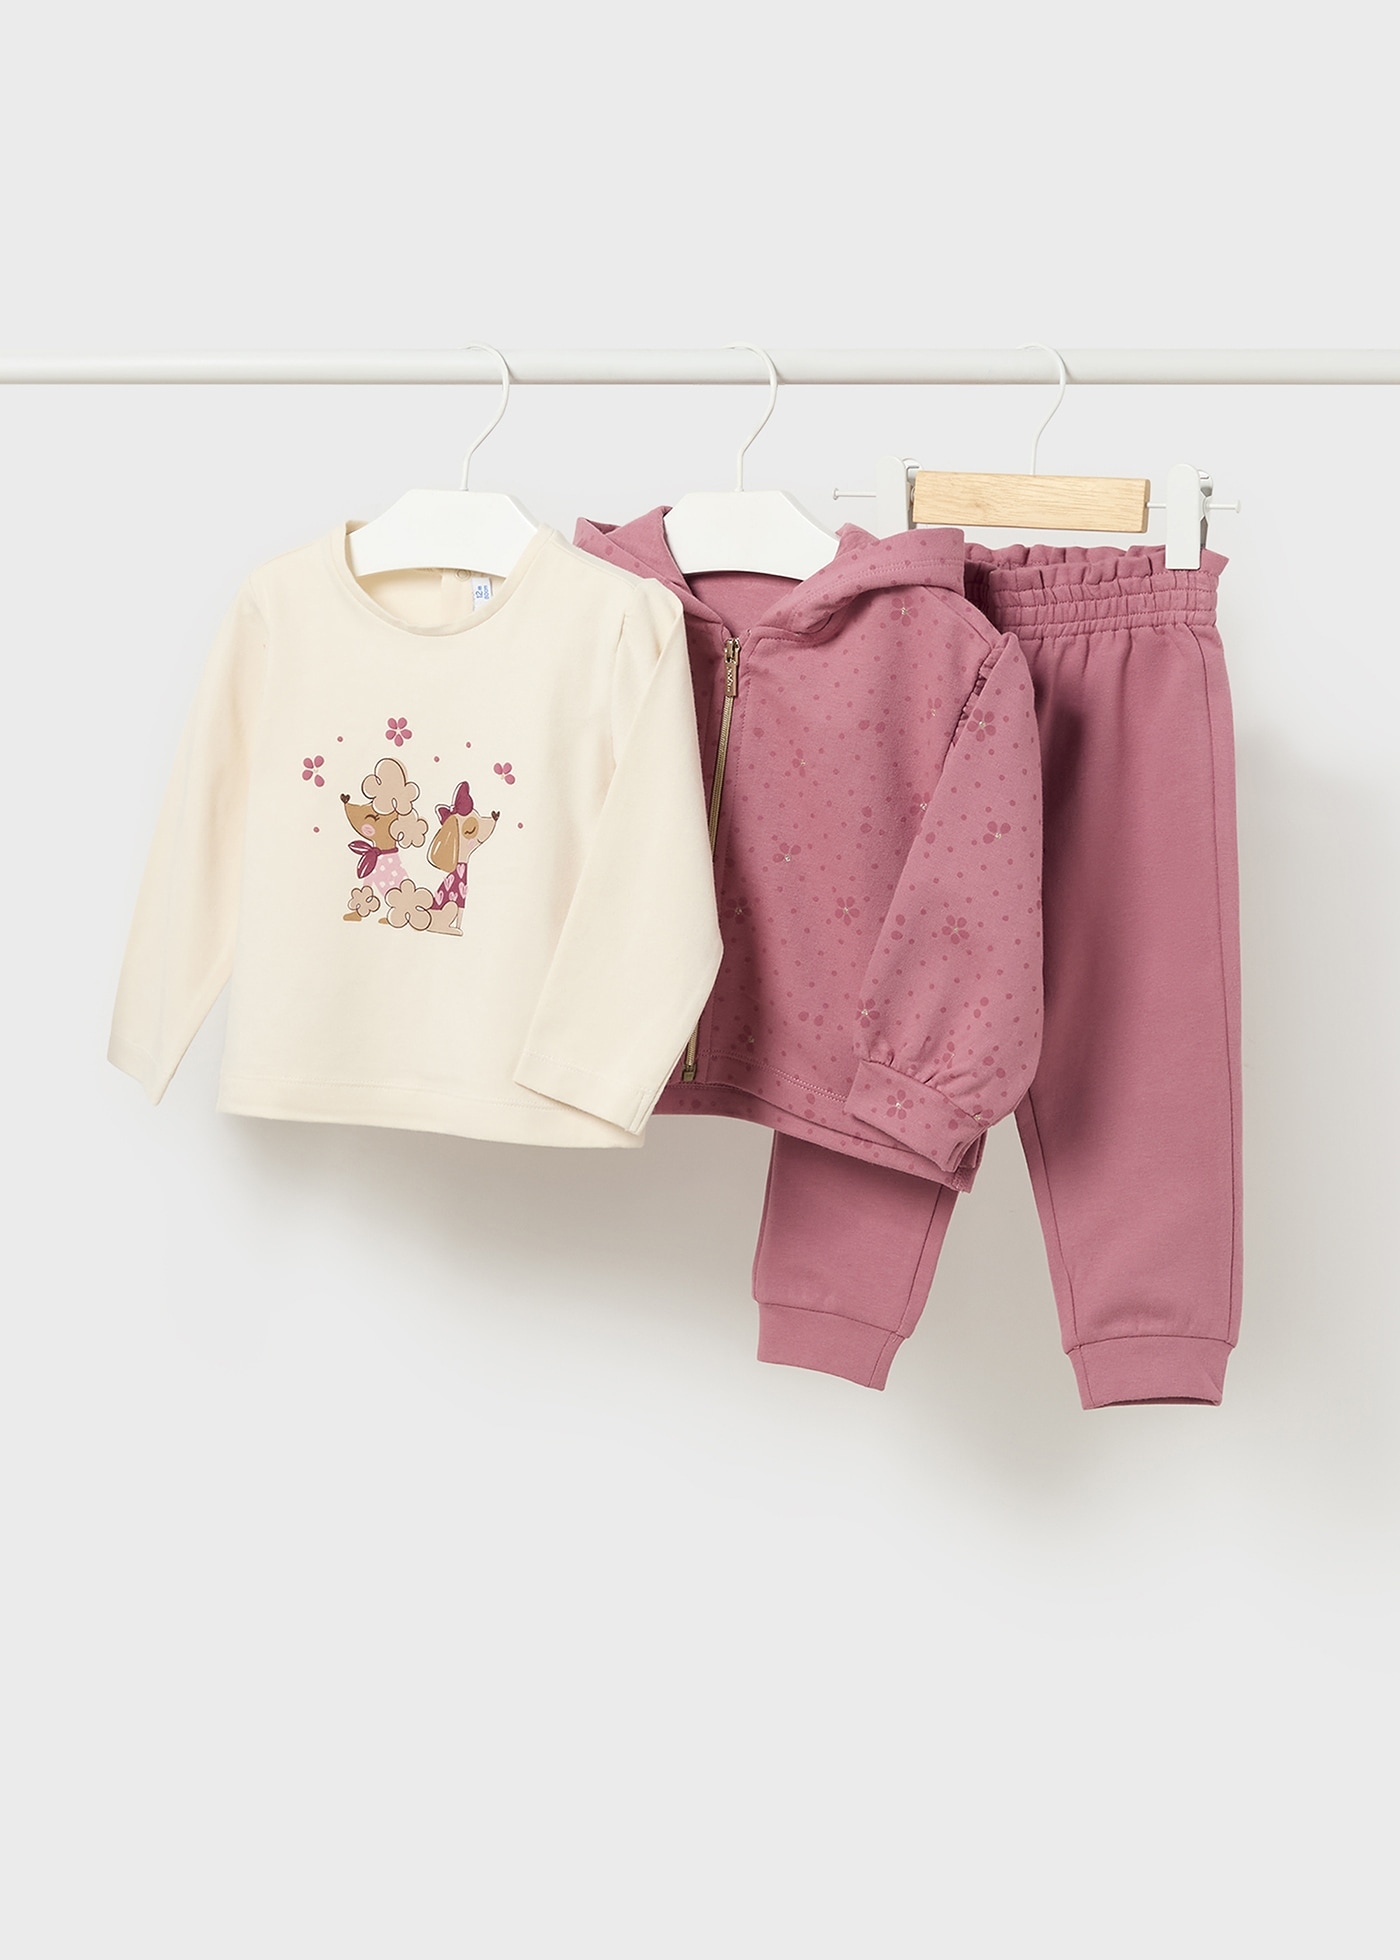 Tracksuit and t-shirt for baby